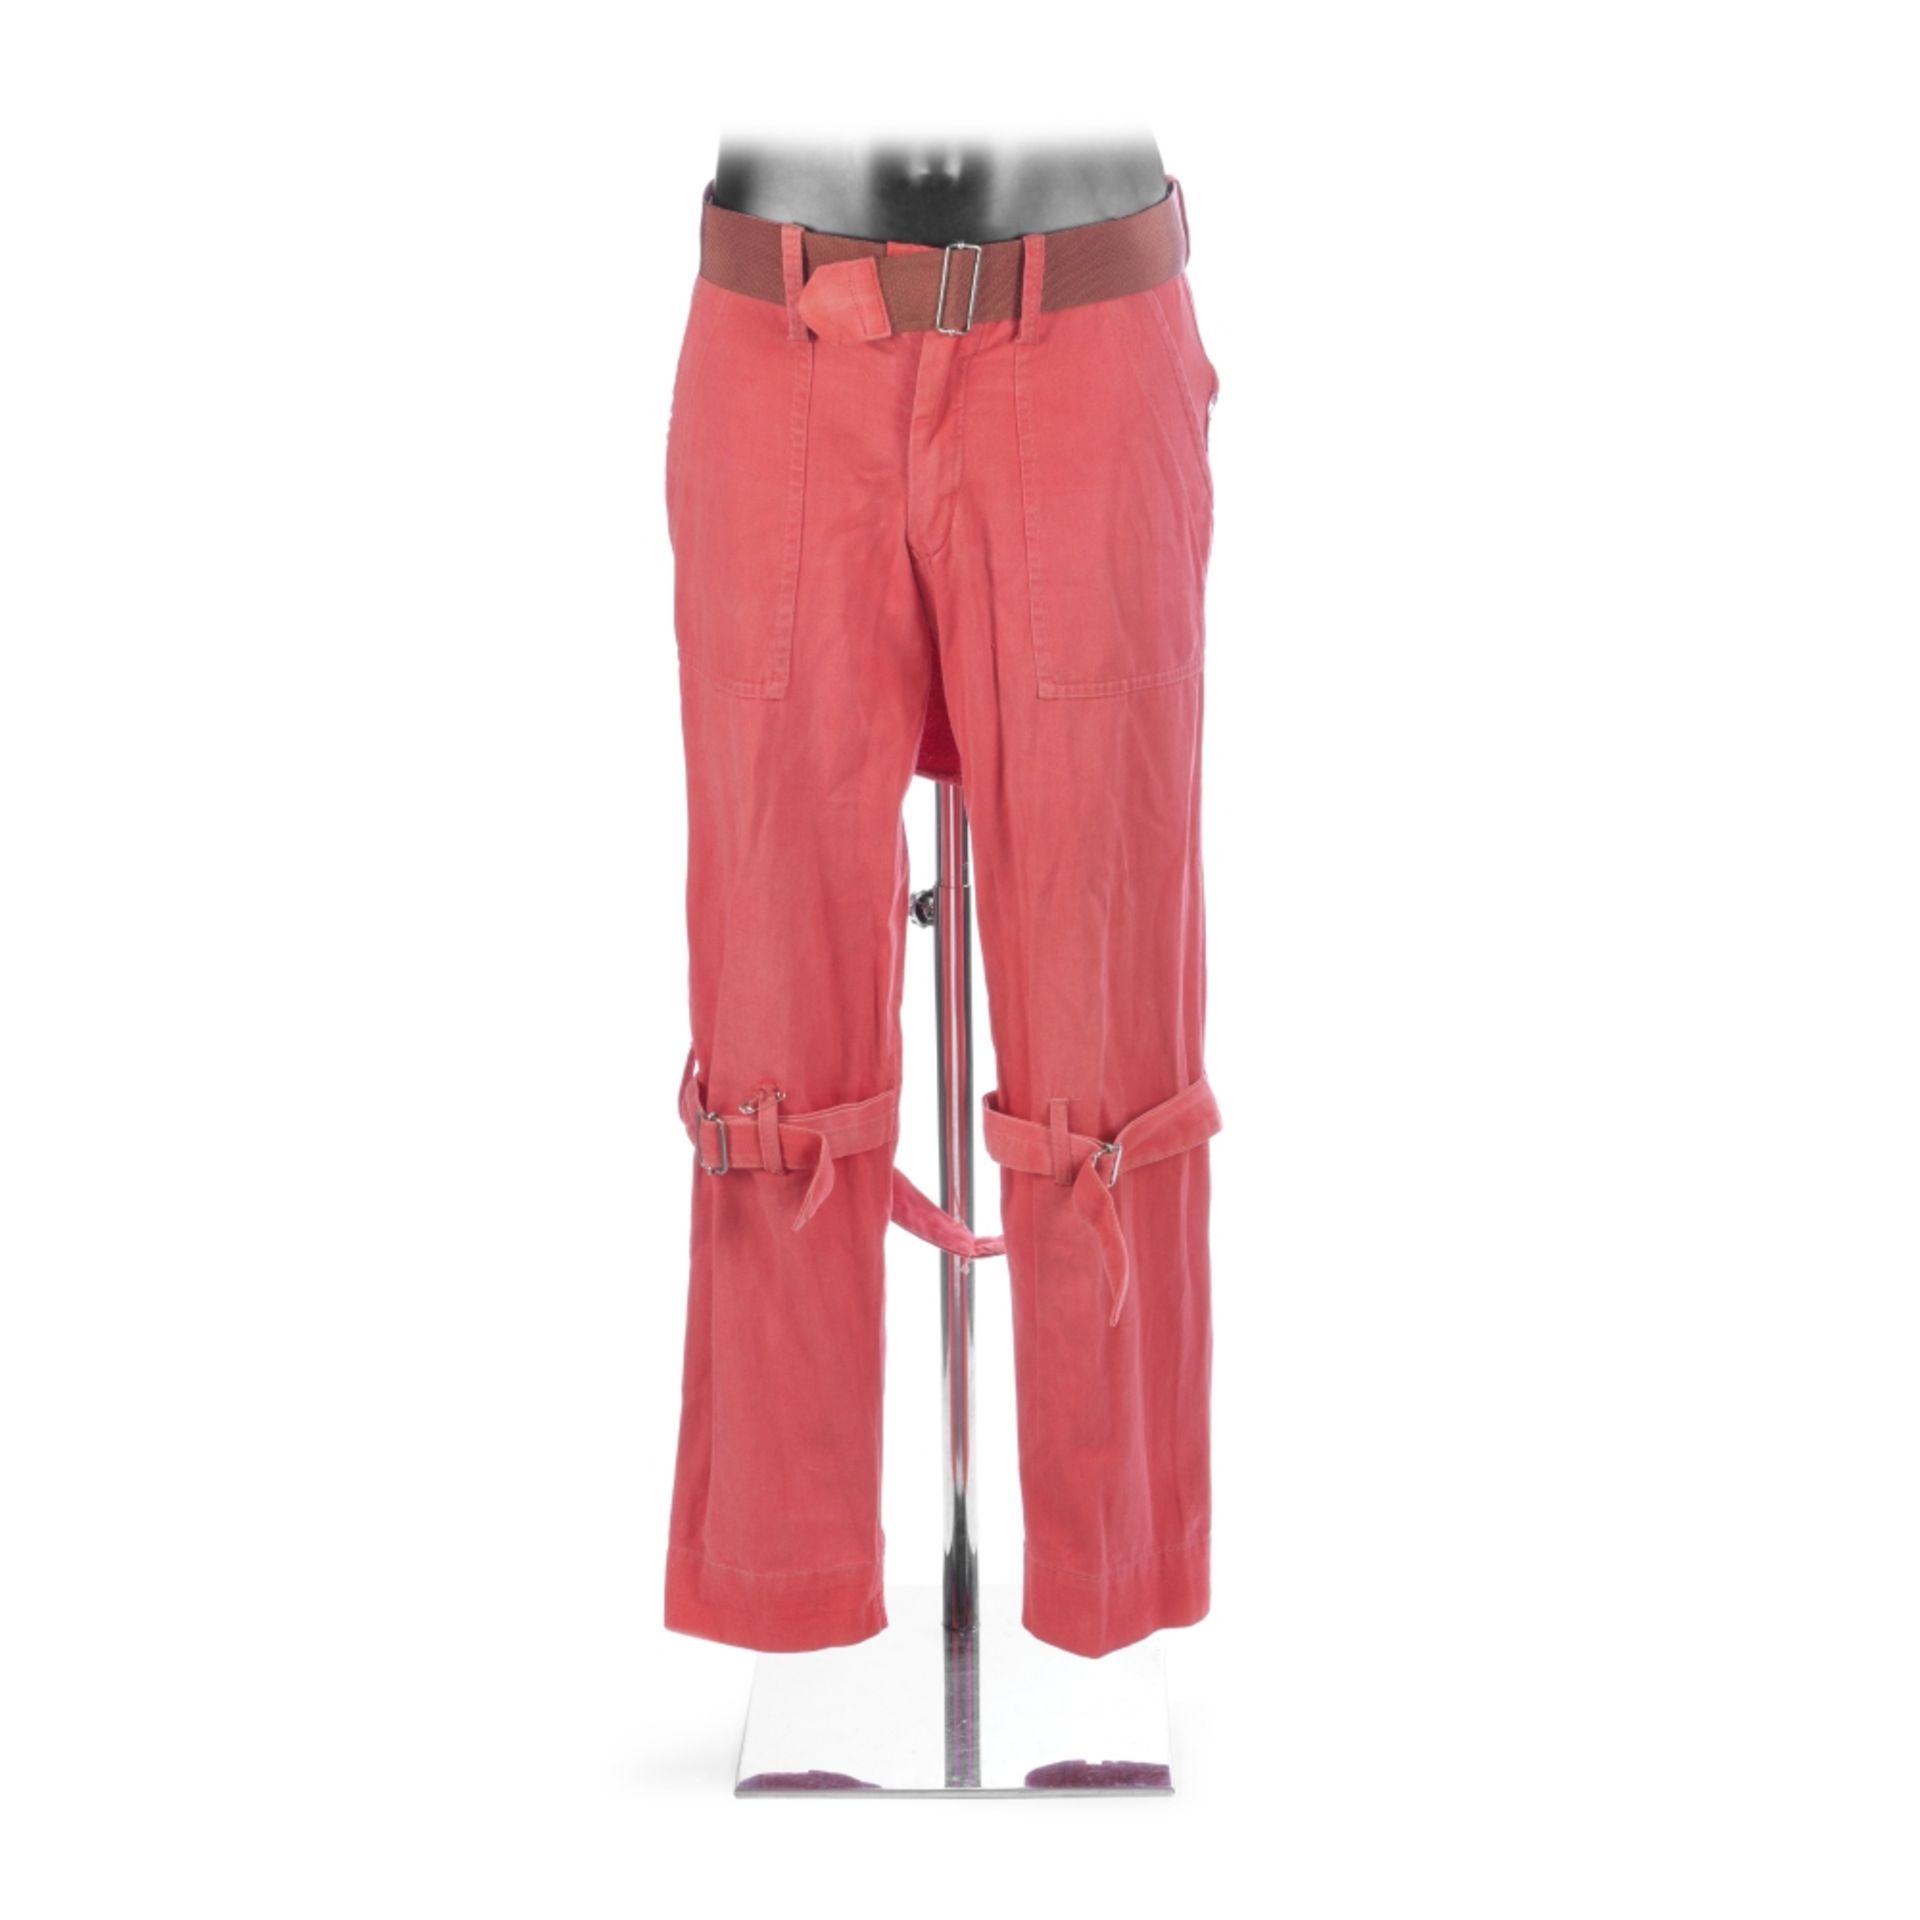 Westwood/McLaren: A Pair Of Red Seditionaries Bondage Trousers, 1977,